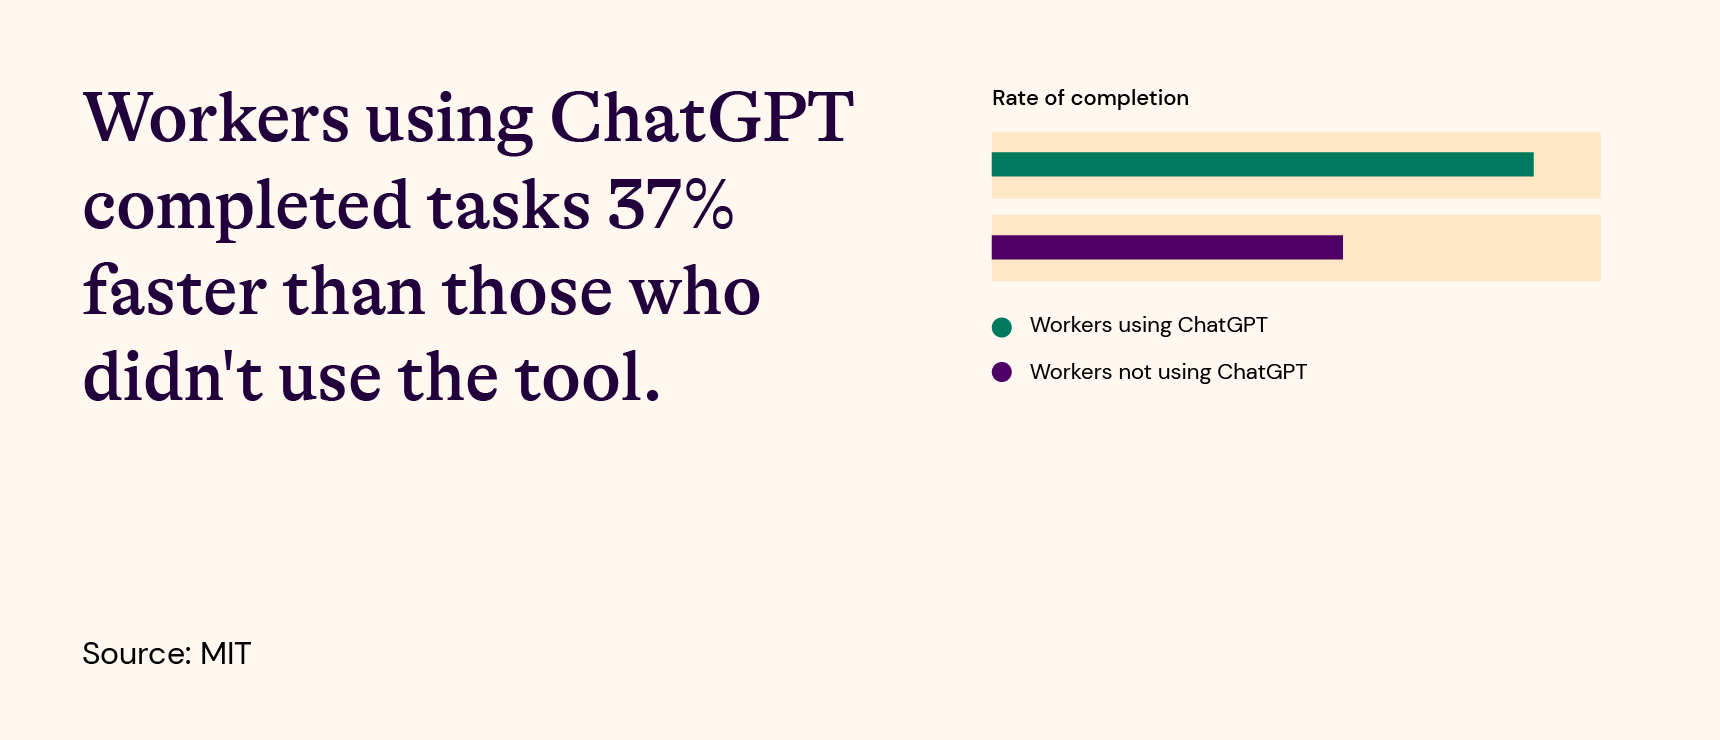 Early MIT research found that workers completed tasks using ChatGPT 37% faster than those who didn't use the tool. 